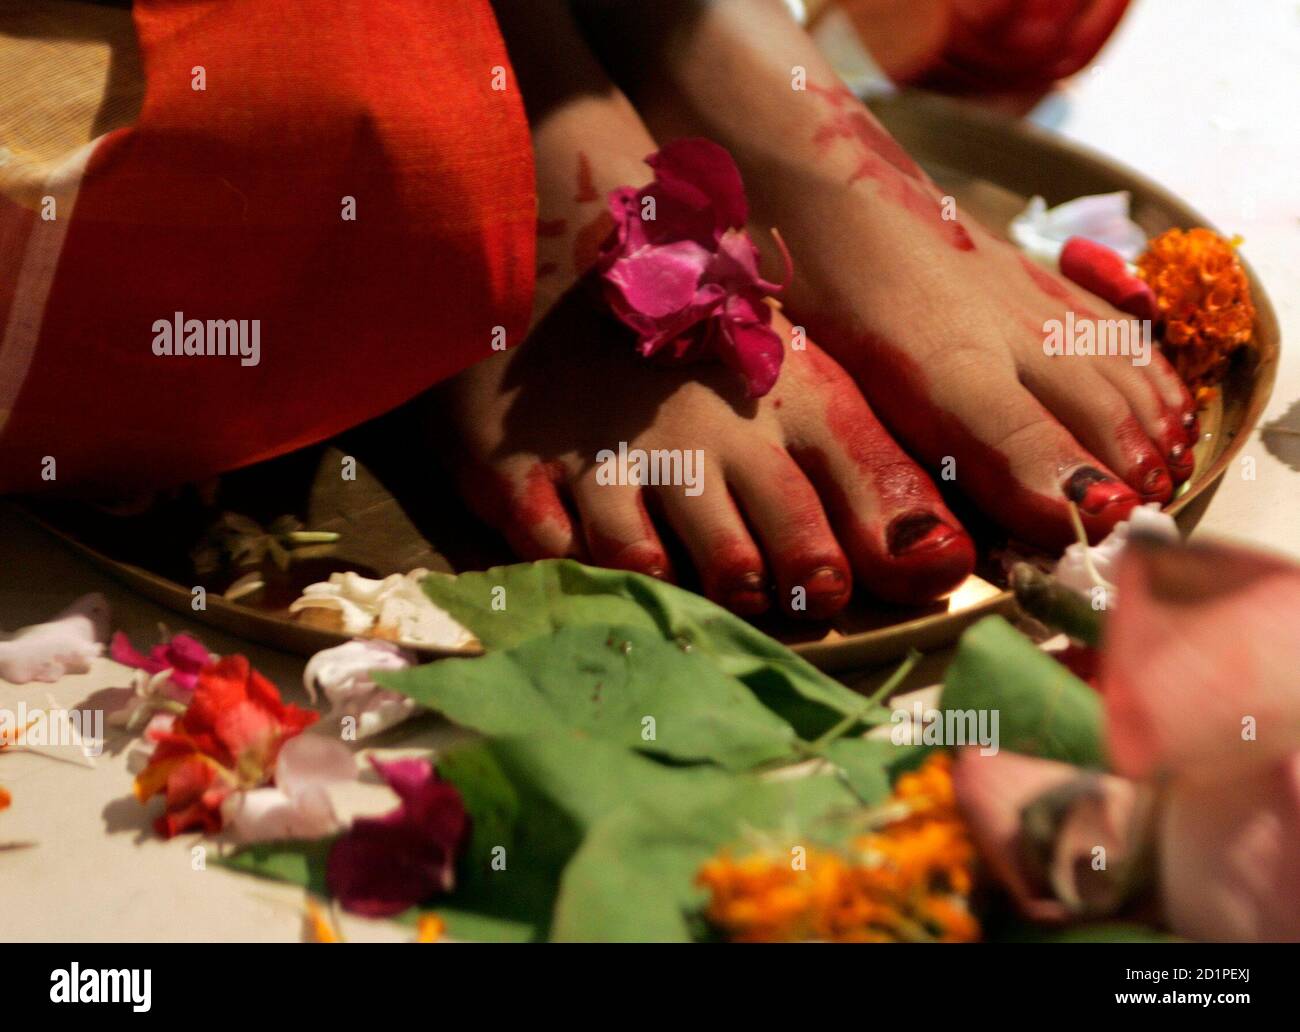 Goddess feet pics Goddess Foot India High Resolution Stock Photography And Images Alamy